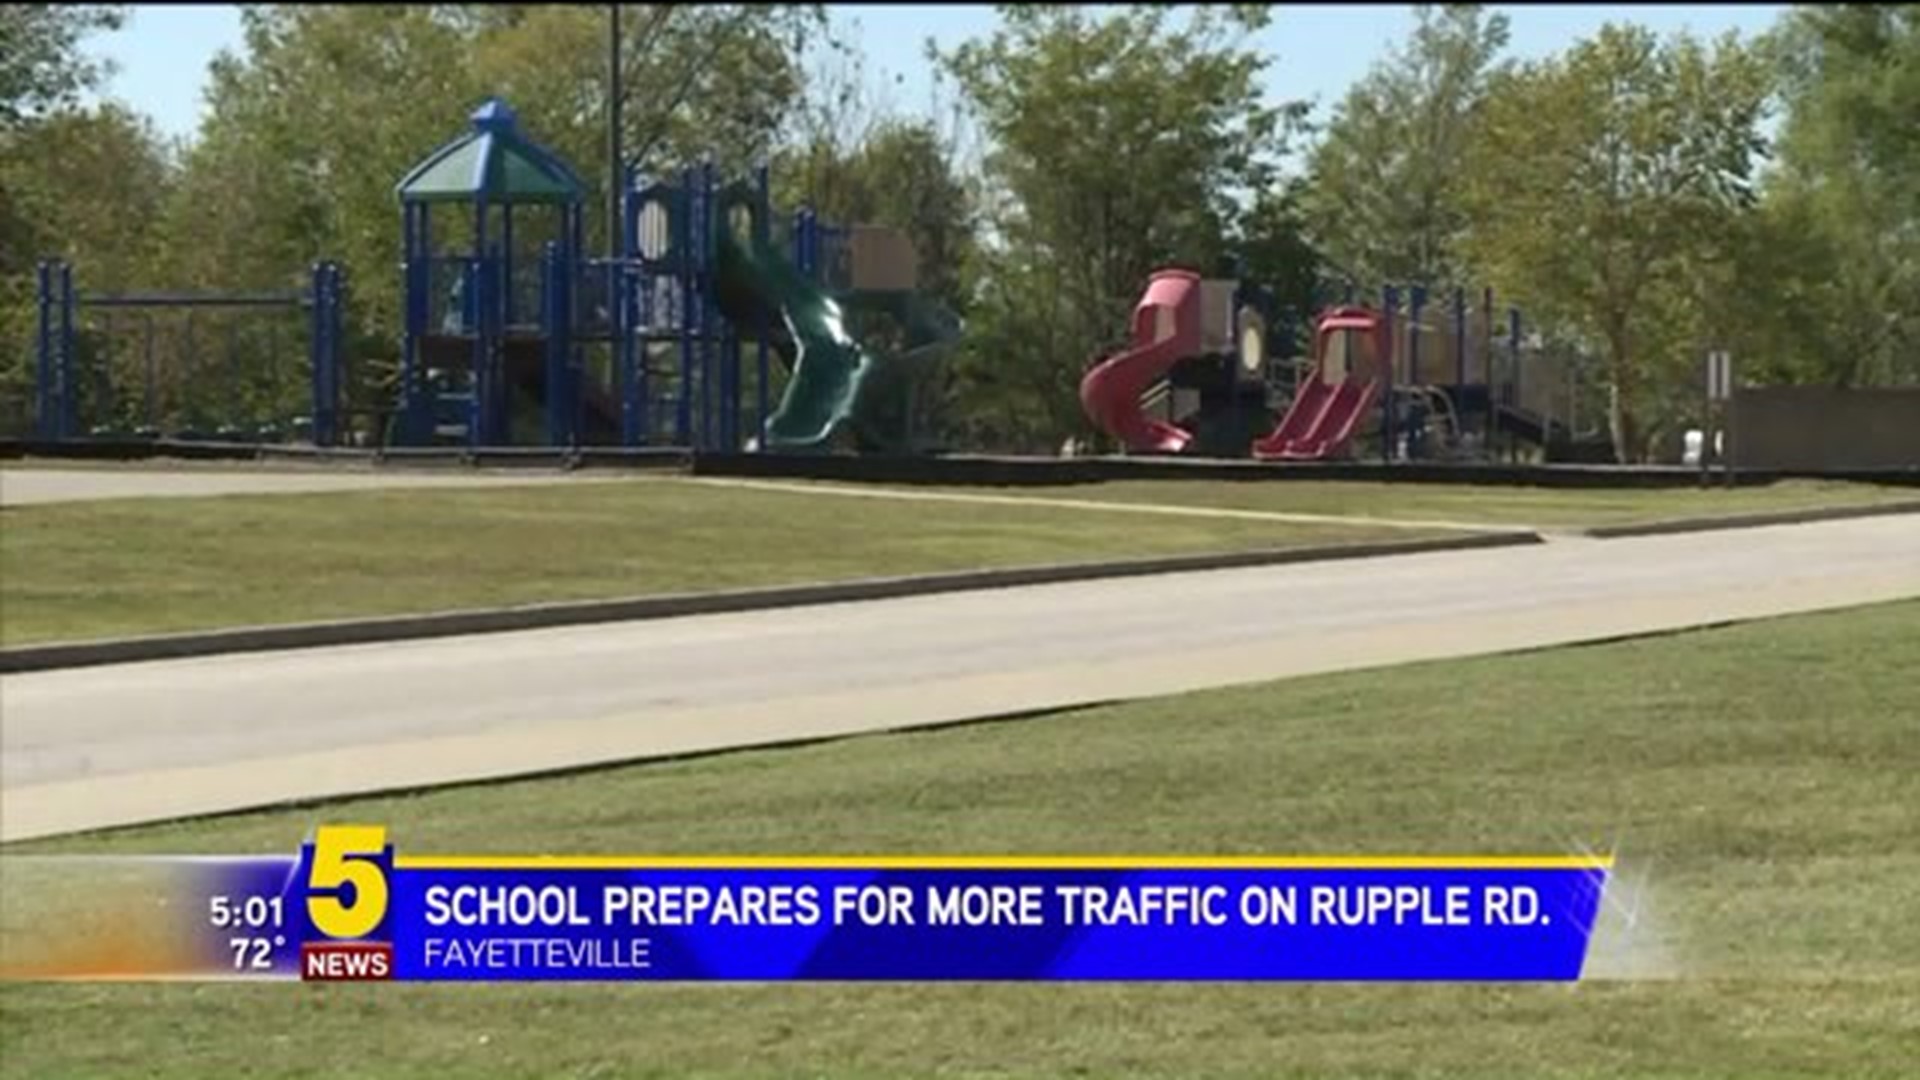 School Prepares For More Traffic On Rupple Rd.